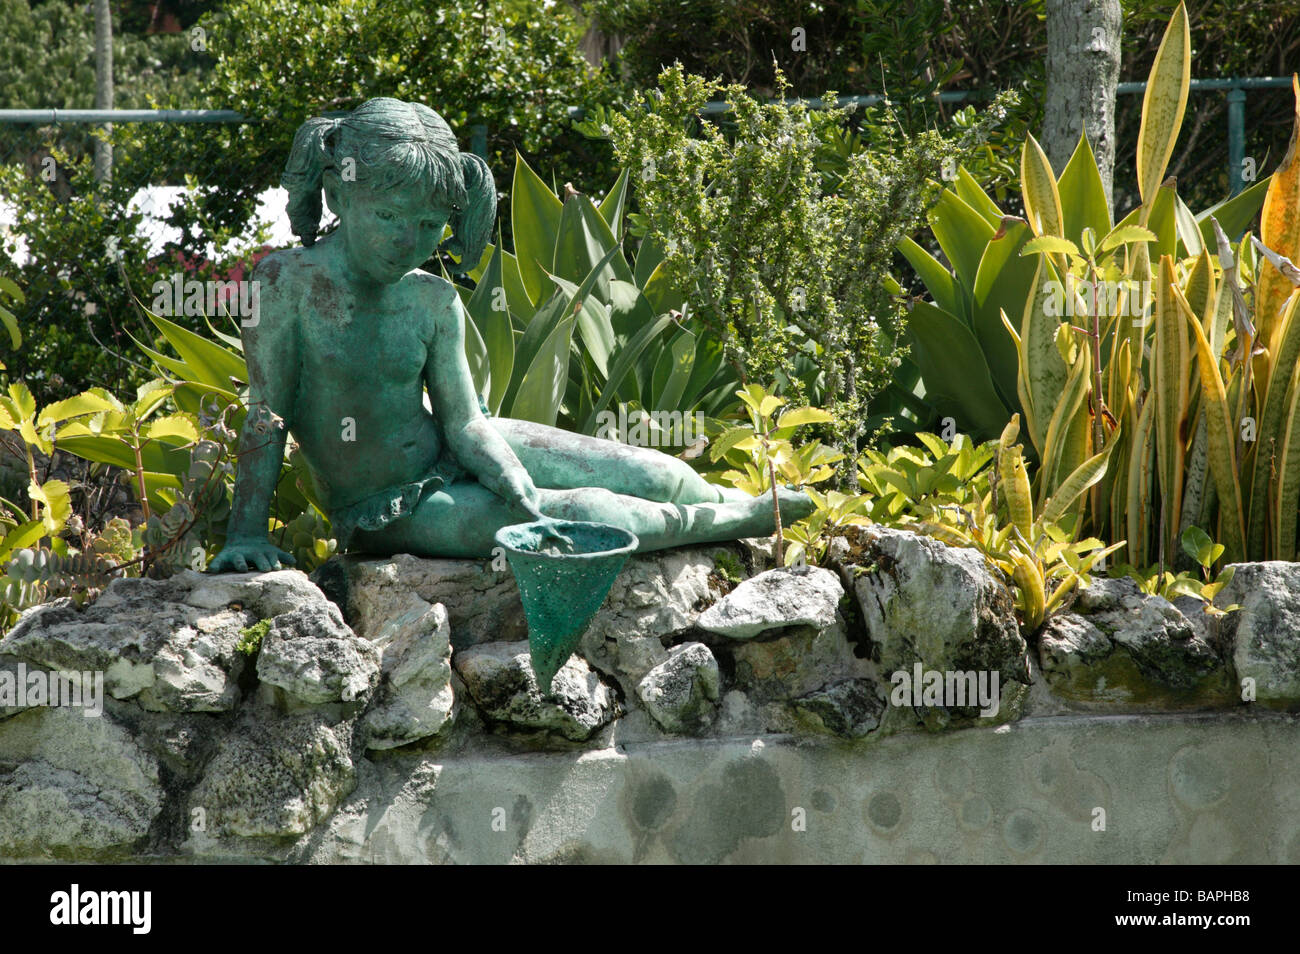 https://c8.alamy.com/comp/BAPHB8/bronze-statue-of-a-young-girl-fishing-with-a-small-net-in-the-bermuda-BAPHB8.jpg